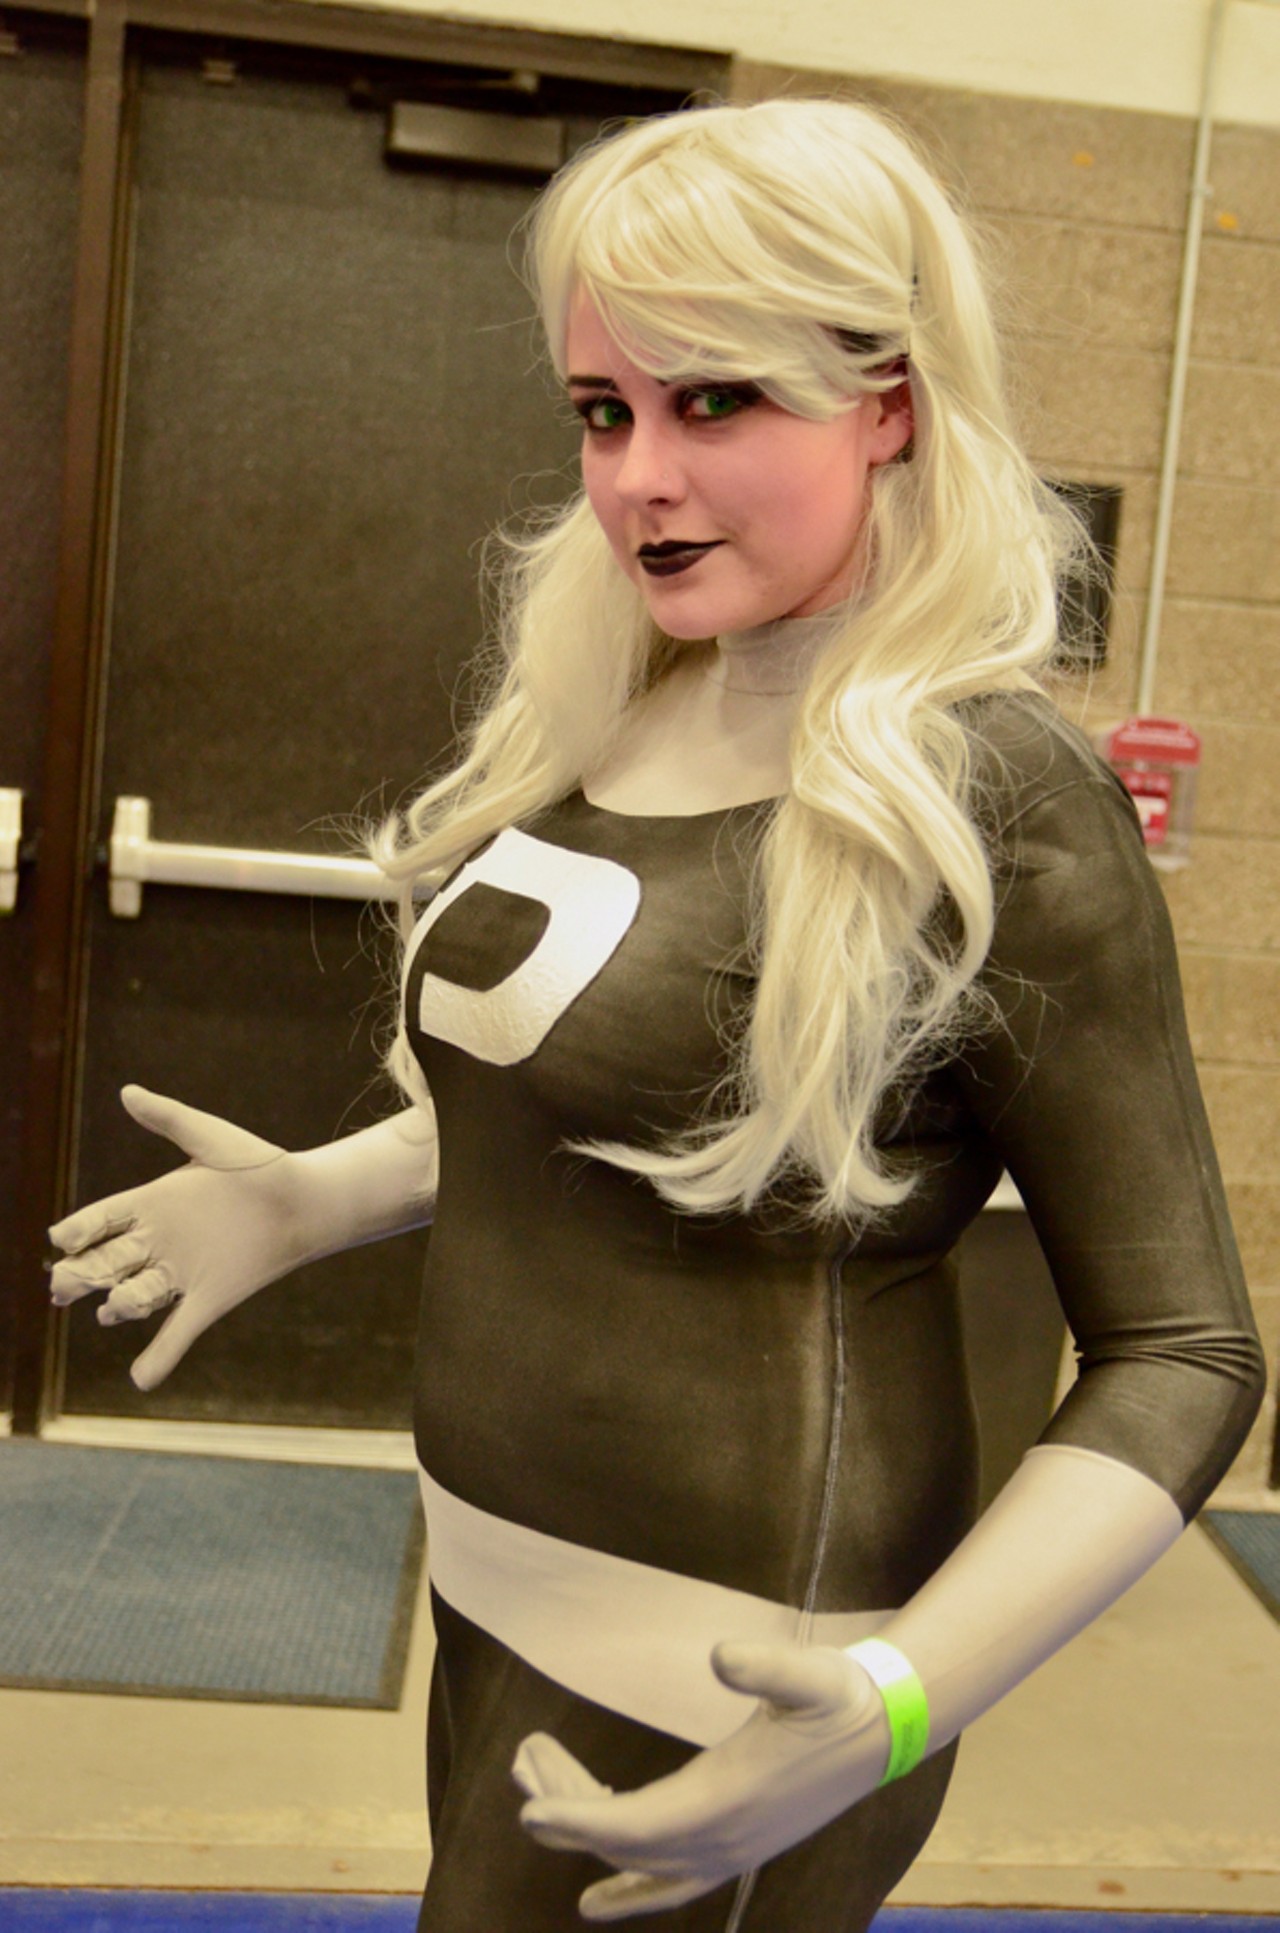 All the crazy cosplayers we saw at Great Lakes Comic Con 2020